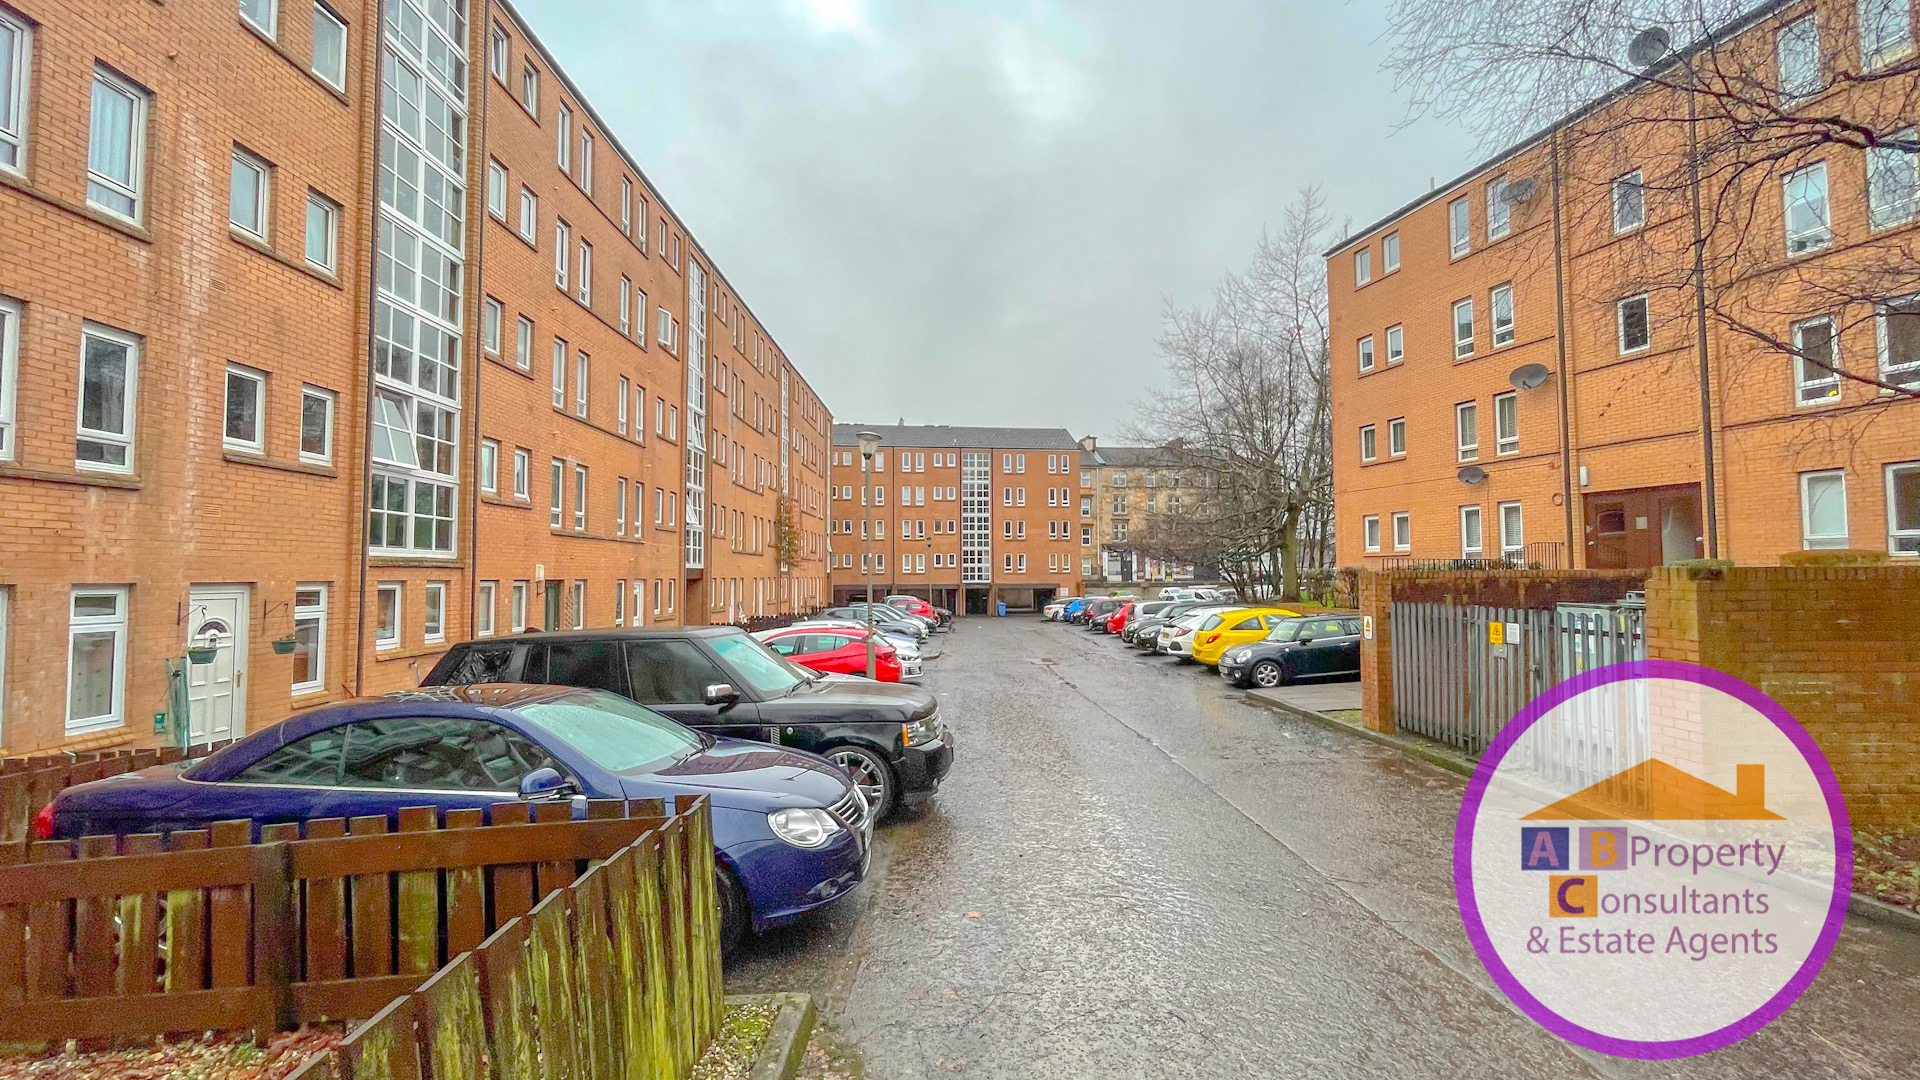 St Vincent Street Glasgow One Bedroom Ground Floor Flat Ab Property Consultants